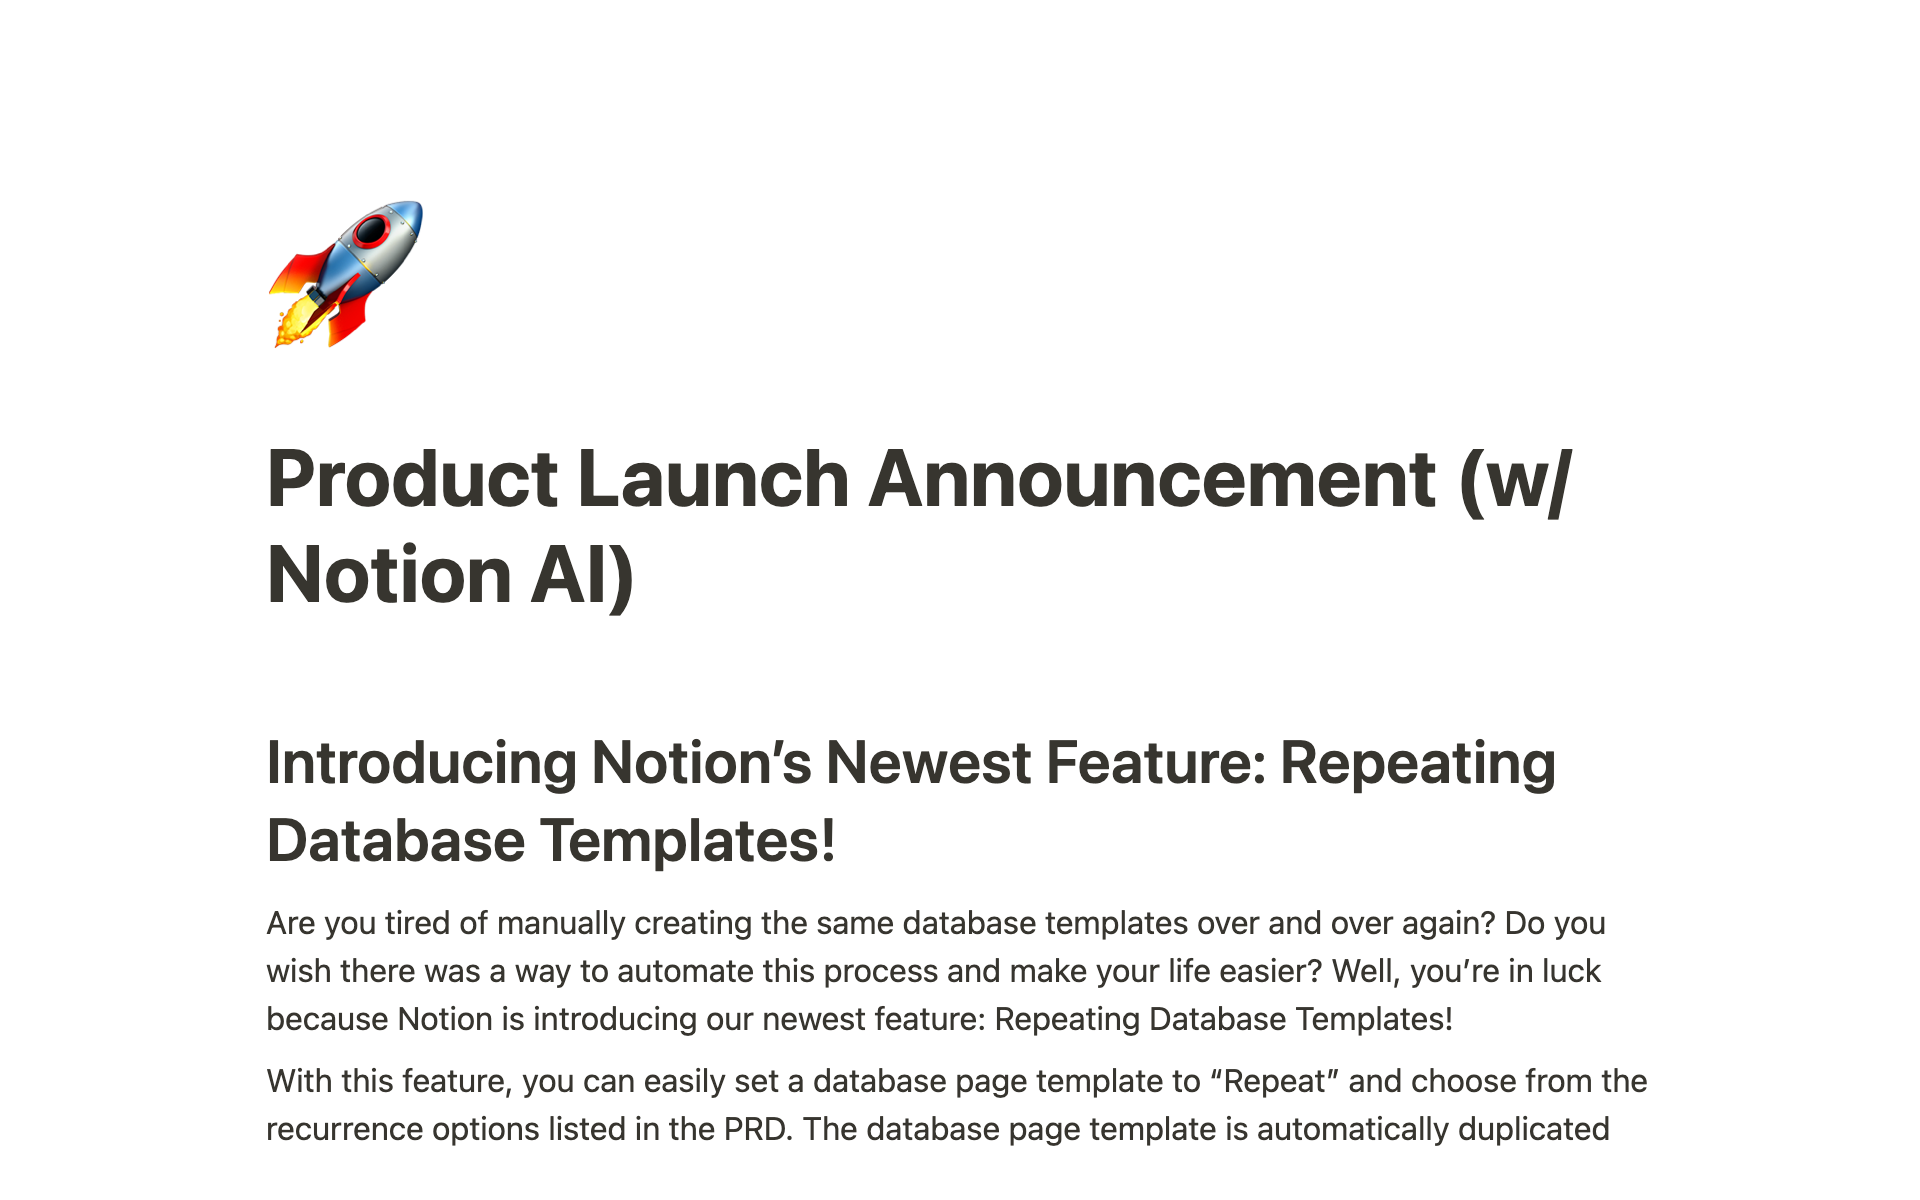 You’ve done the hard work of actually building the product, now you just need to launch it. Start with Notion AI.